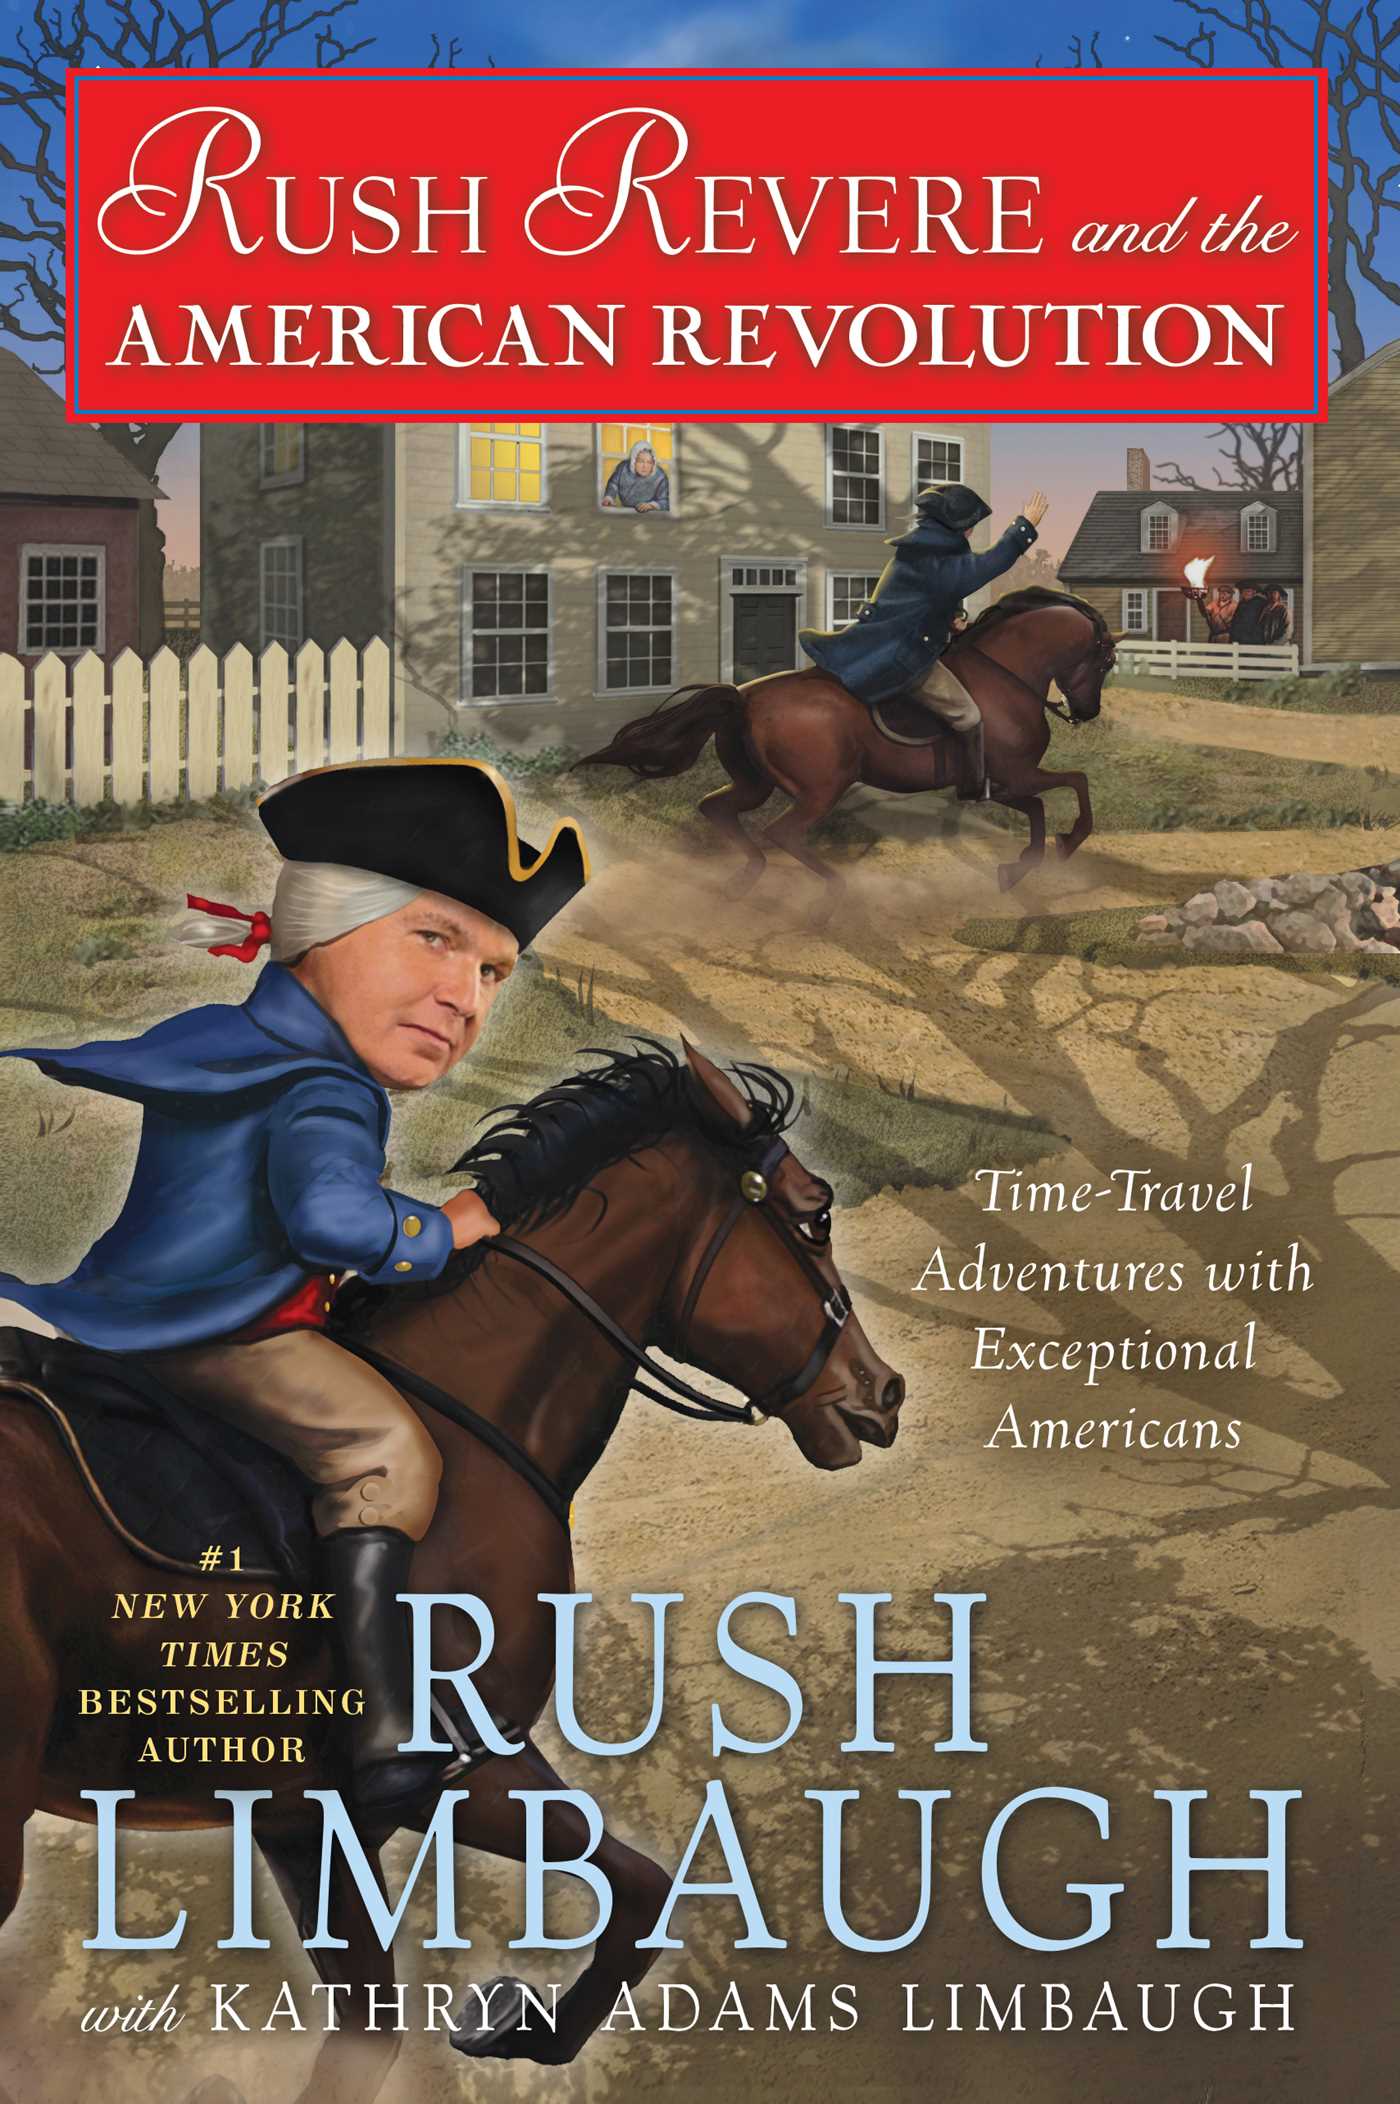 Rush Revere: Rush Revere and the American Revolution : Time-Travel Adventures With Exceptional Americans (Series #3) (Hardcover) - image 1 of 1